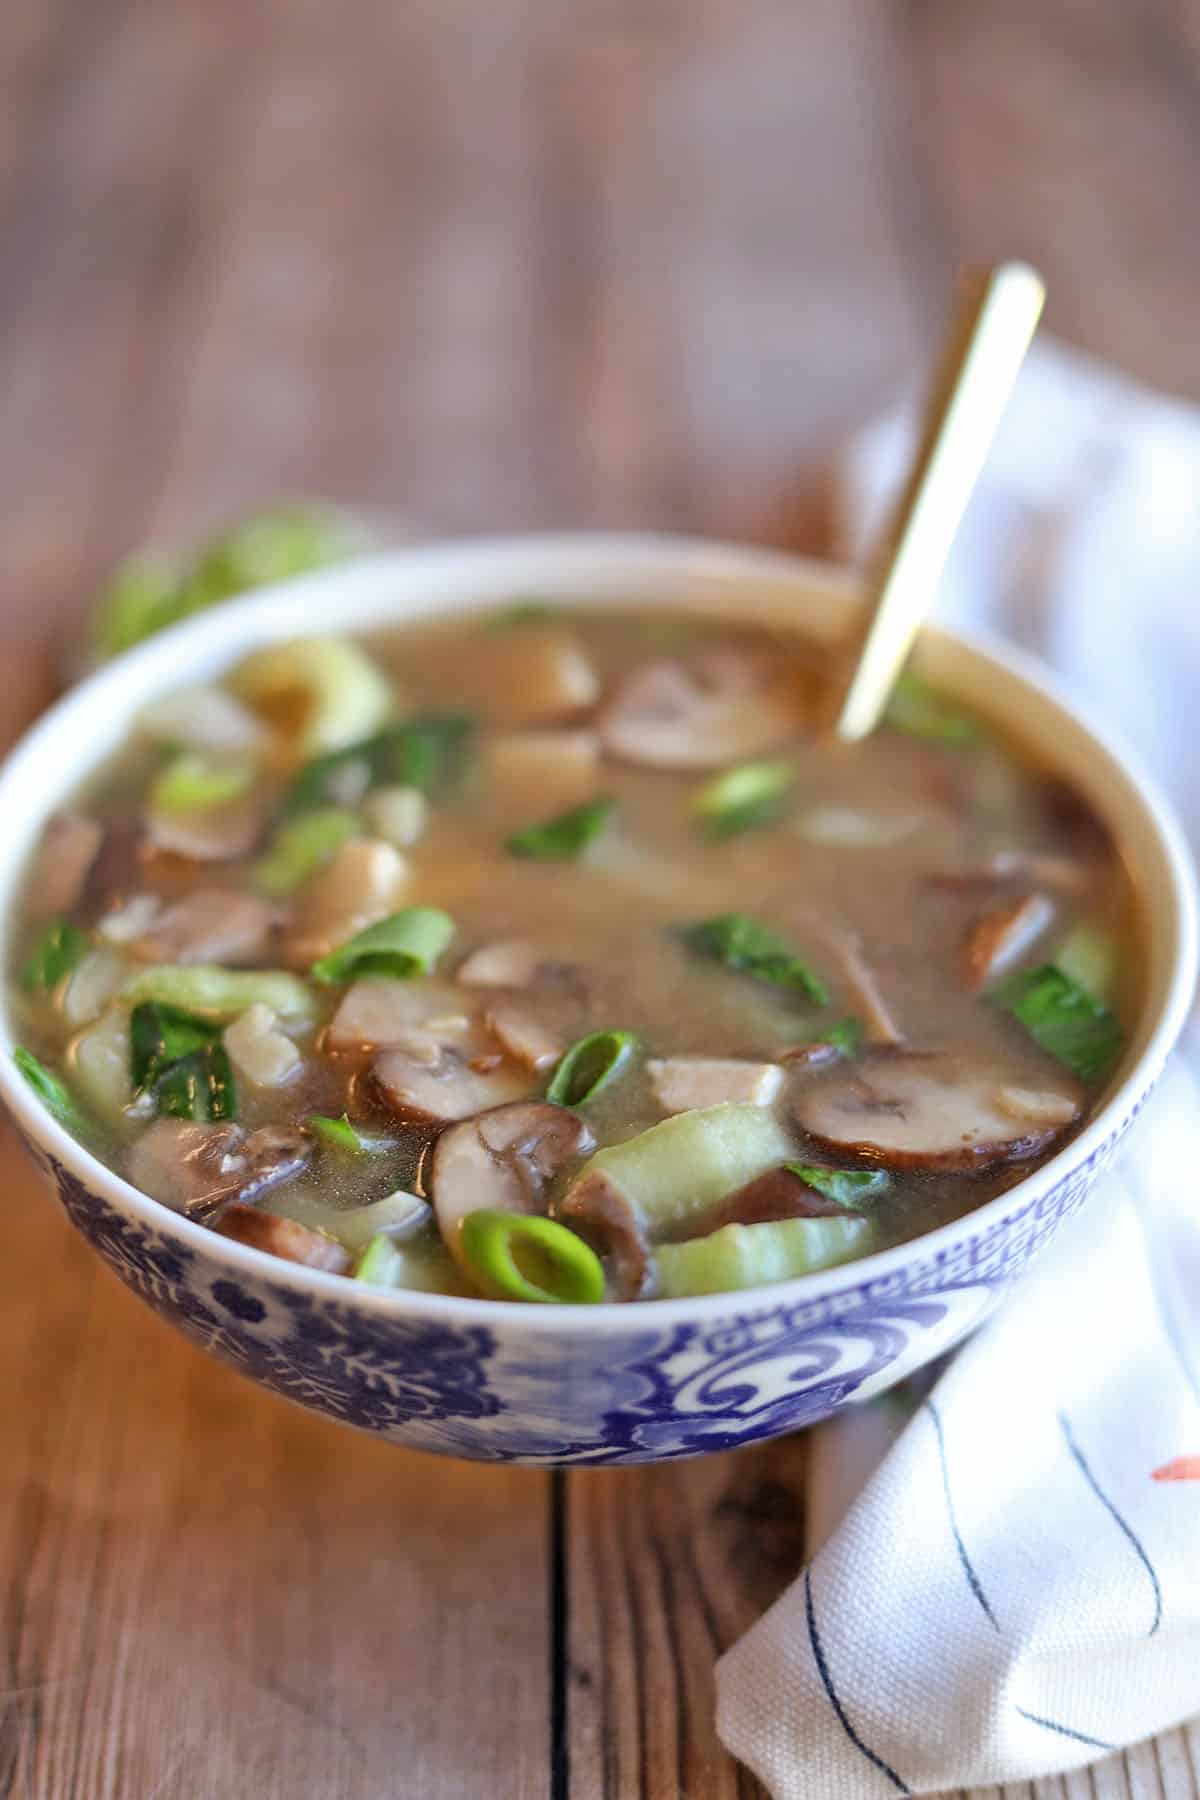 Miso soup with mushrooms in bowl with gold spoon.